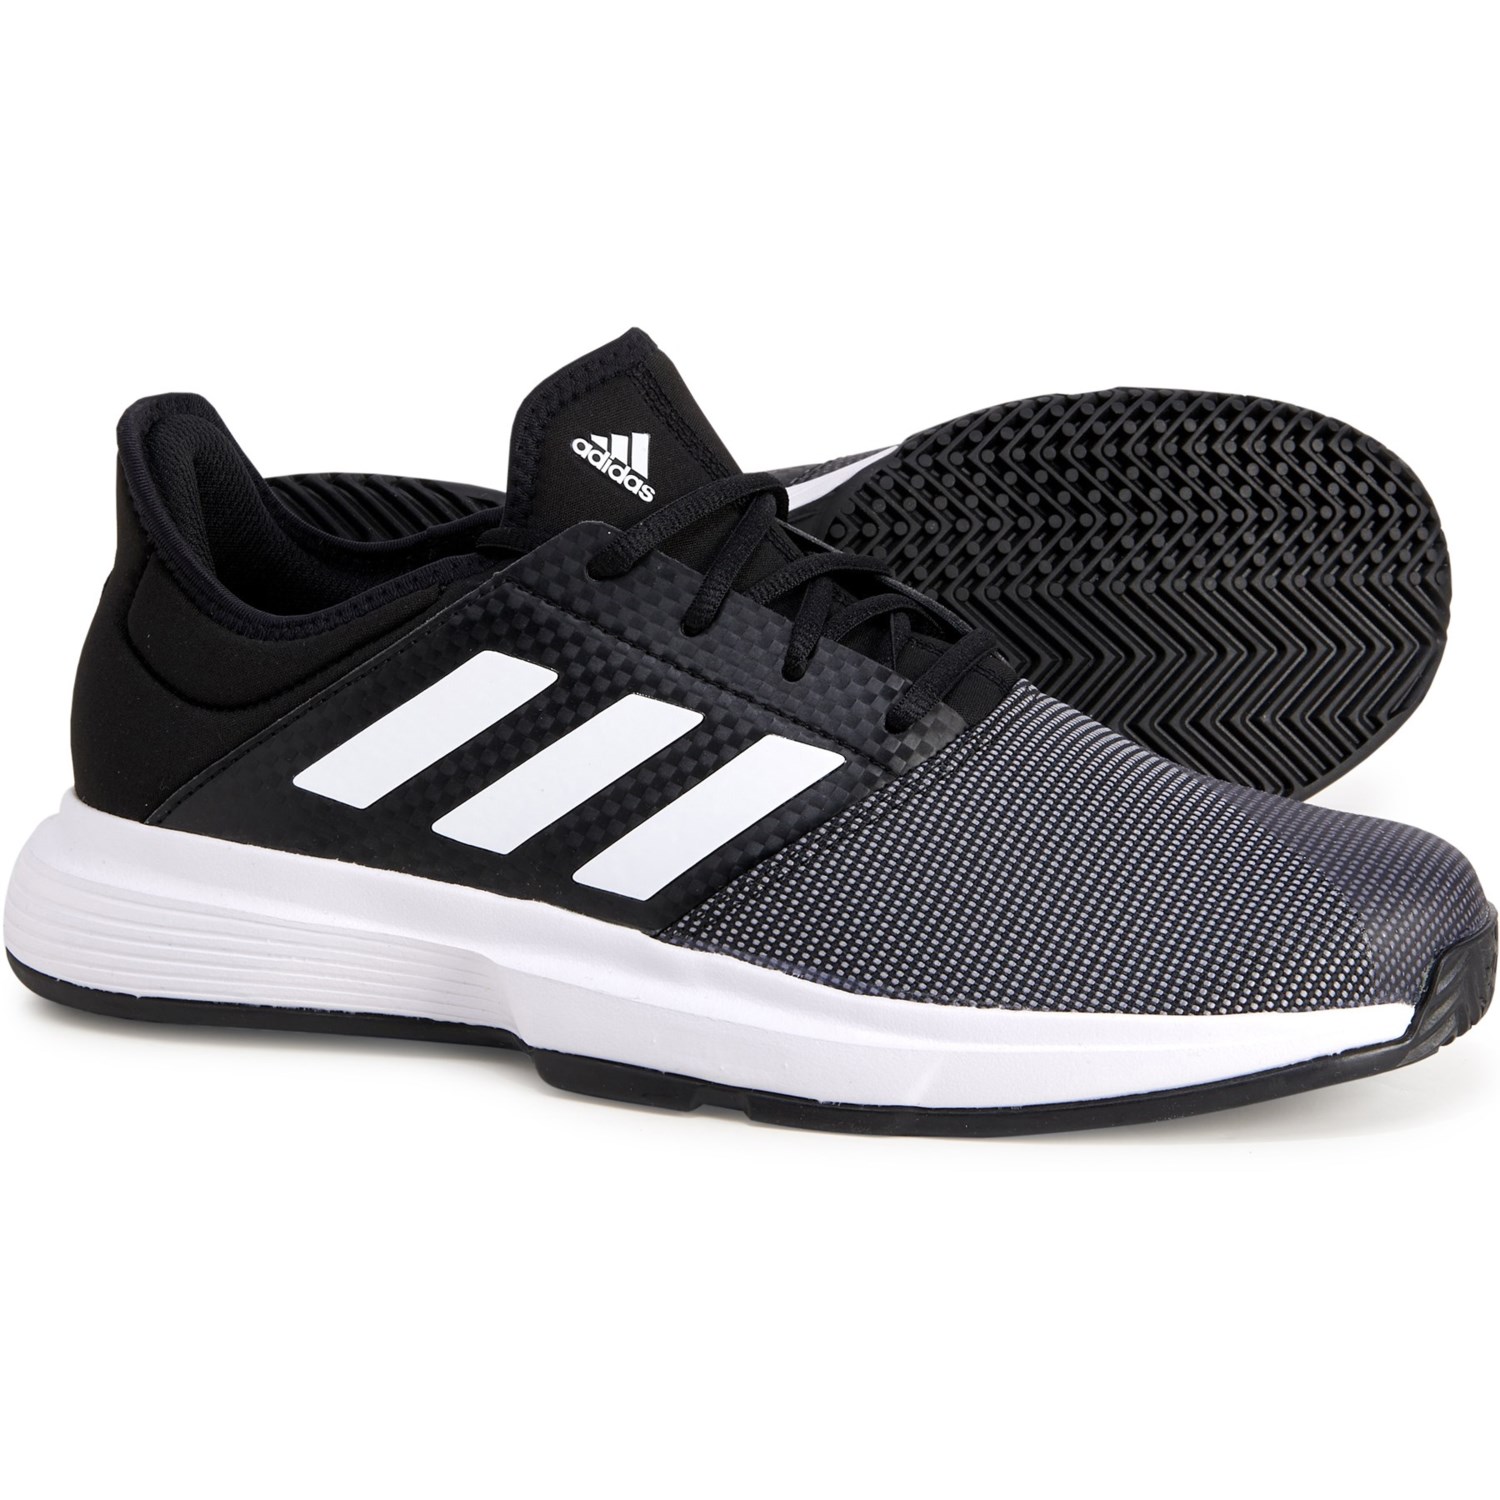 adidas tennis shoes game court